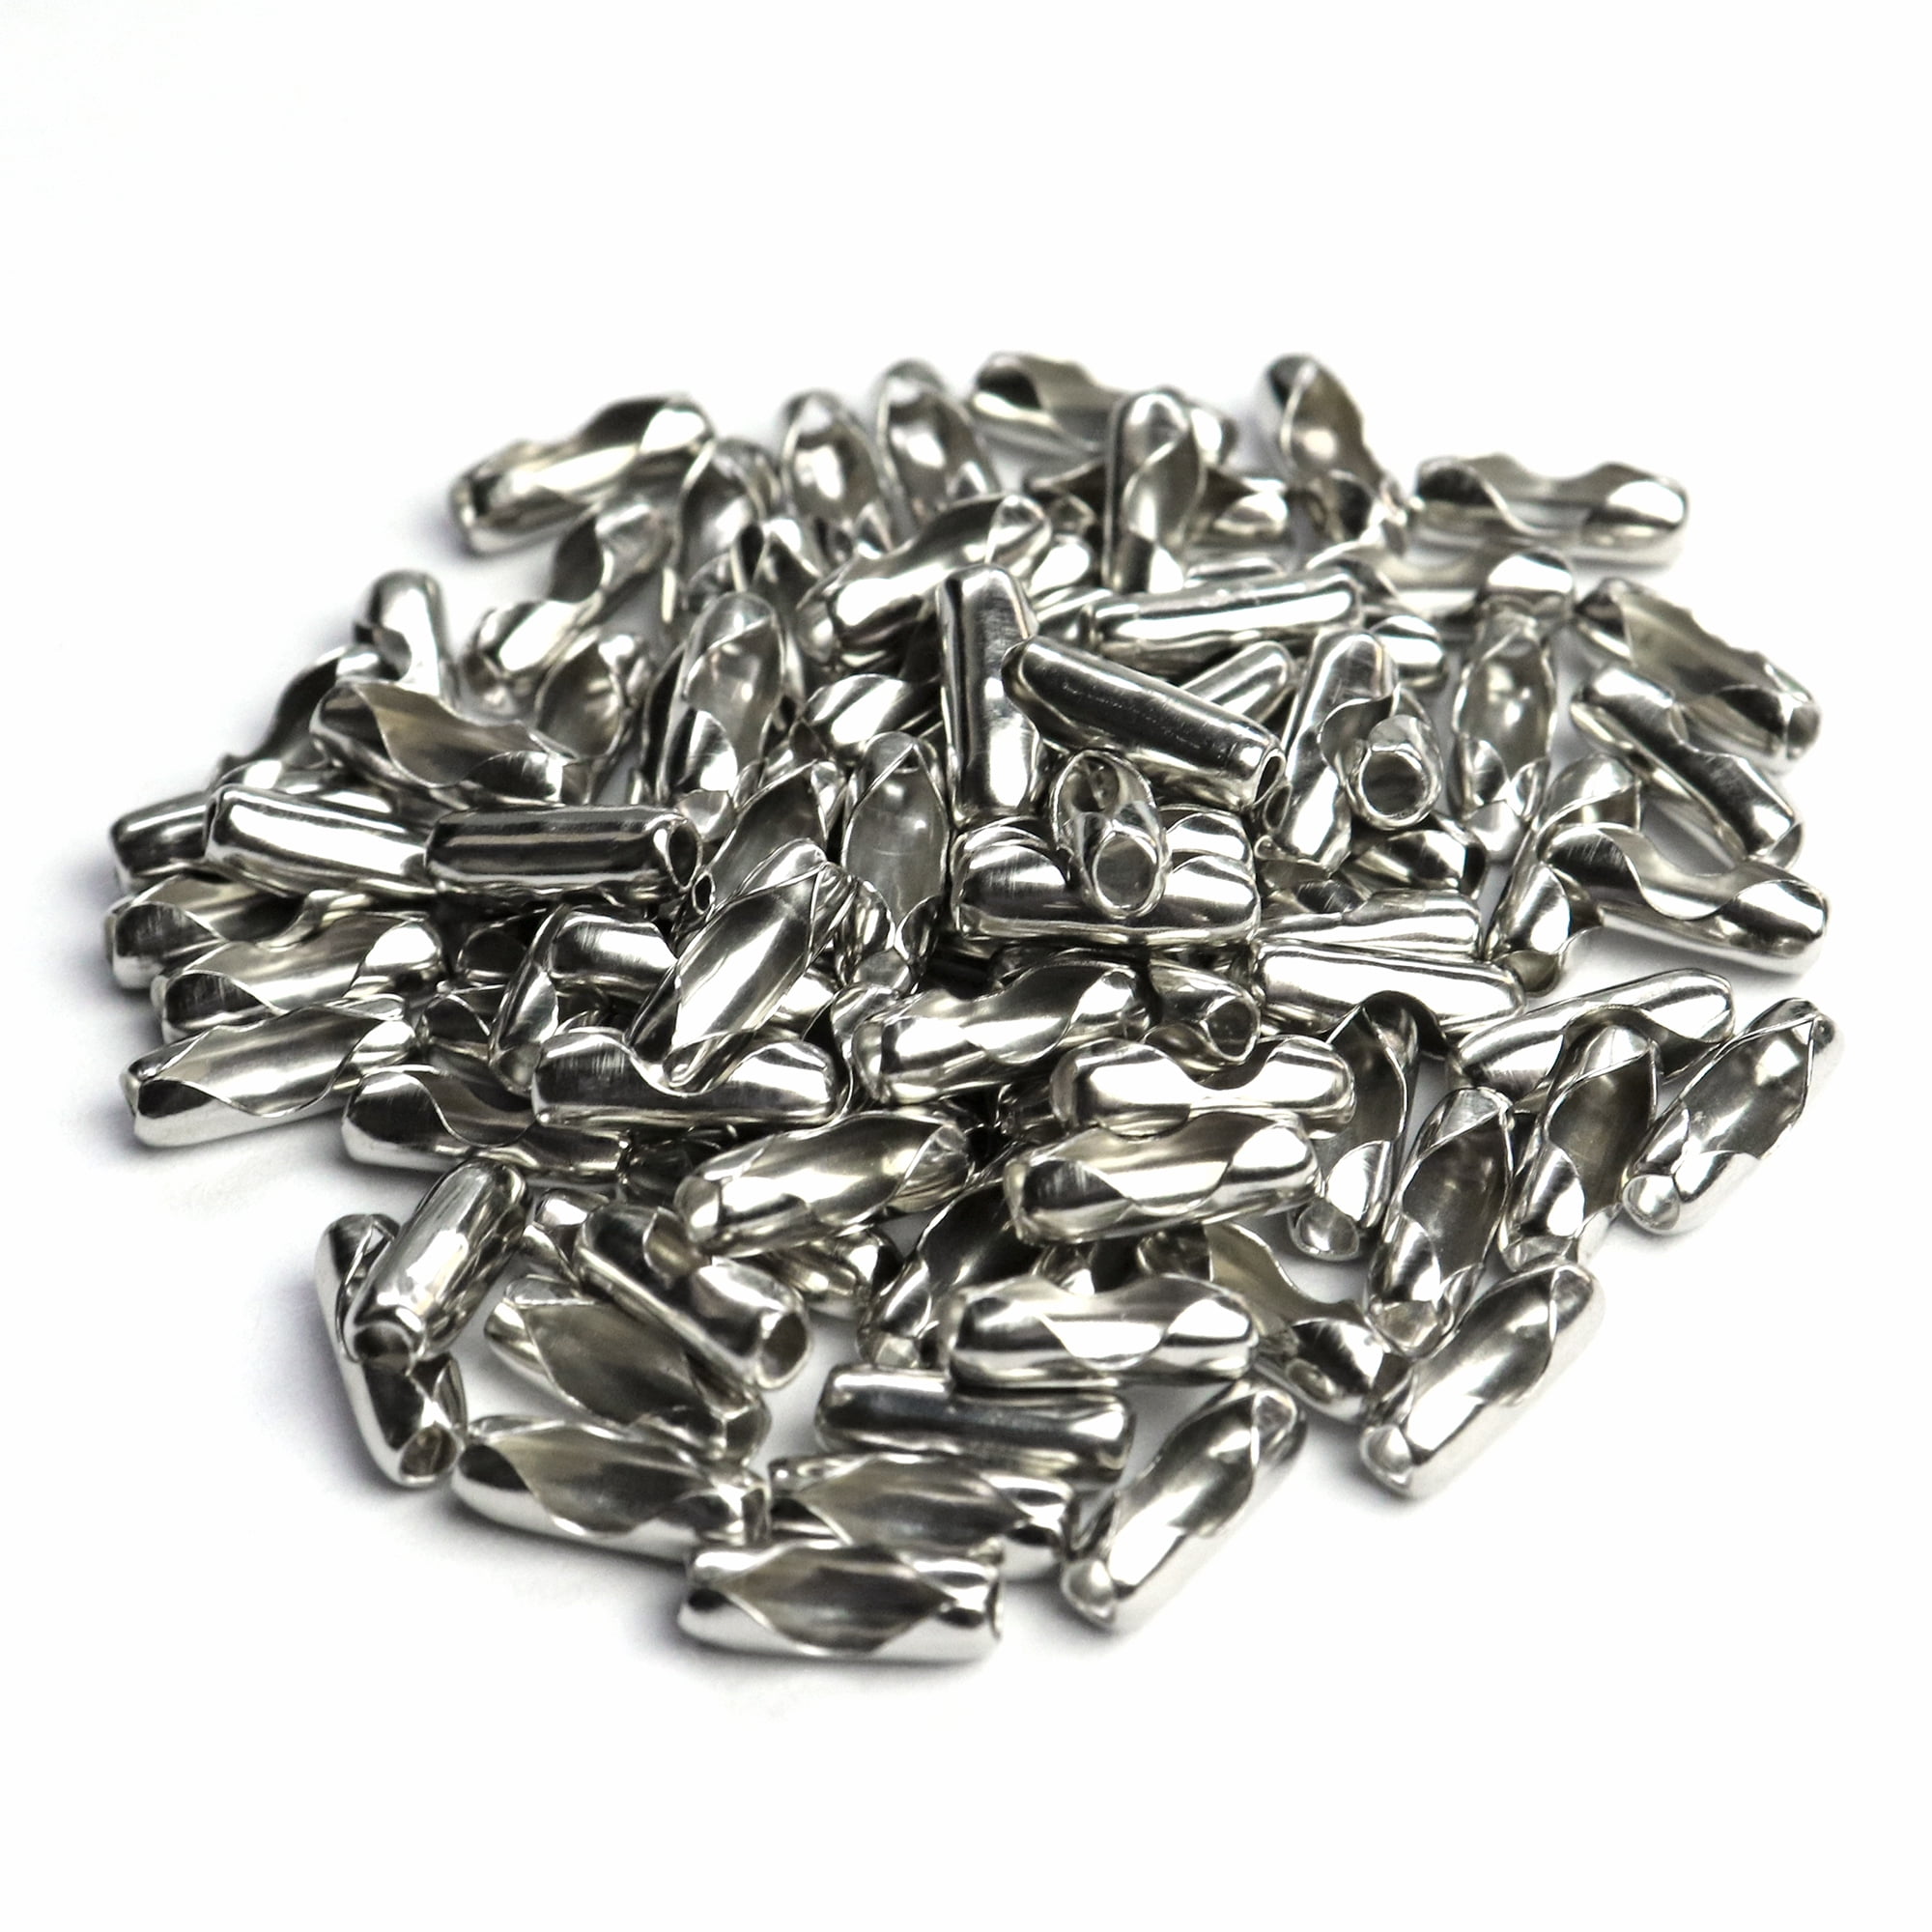 Shop for and Buy Number 3 Ball Chain Connectors Nickel Plated Steel at  . Large selection and bulk discounts available.